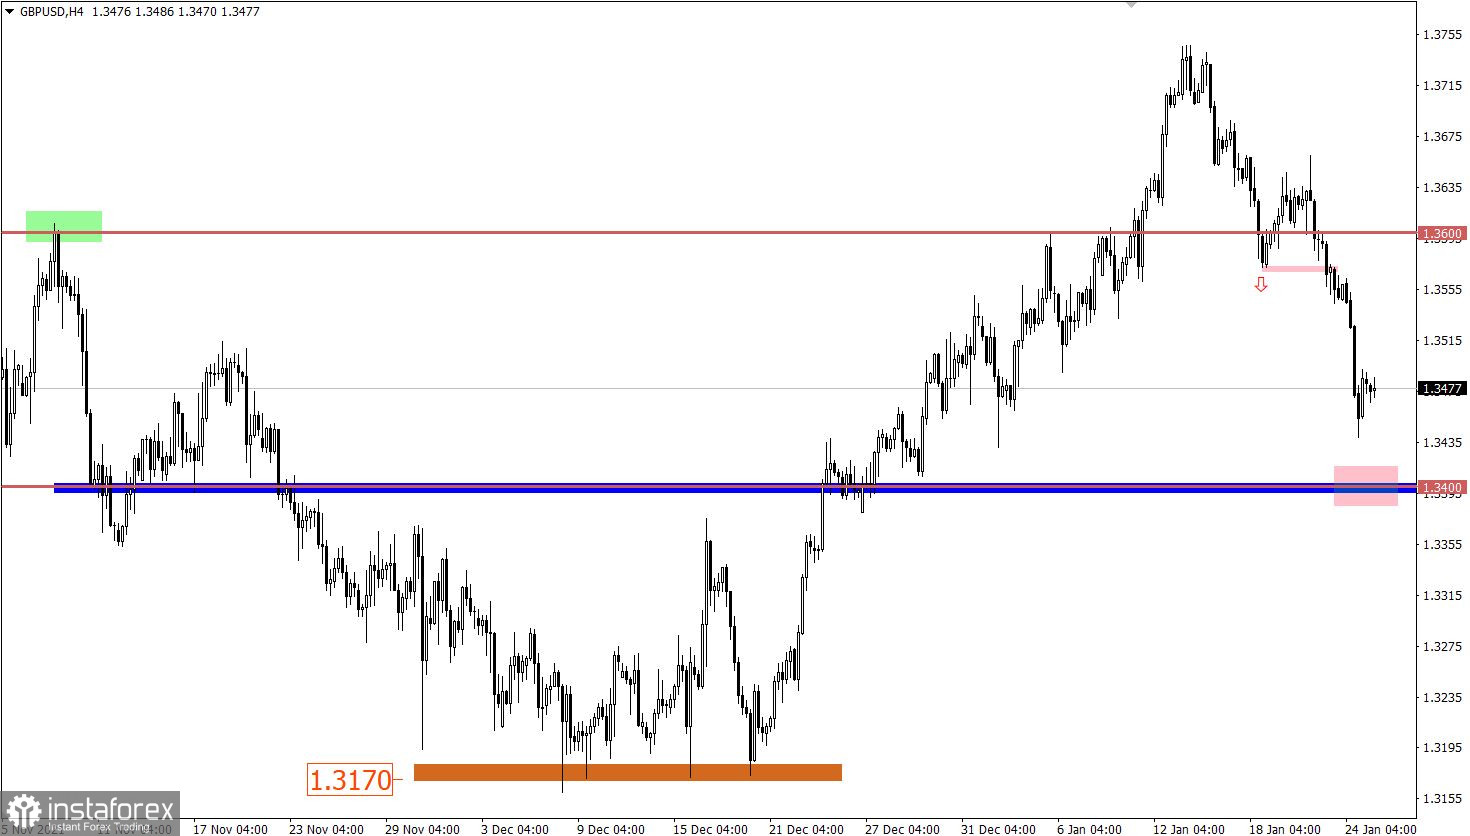 Trading plan for starters of EUR/USD and GBP/USD on January 25, 2021